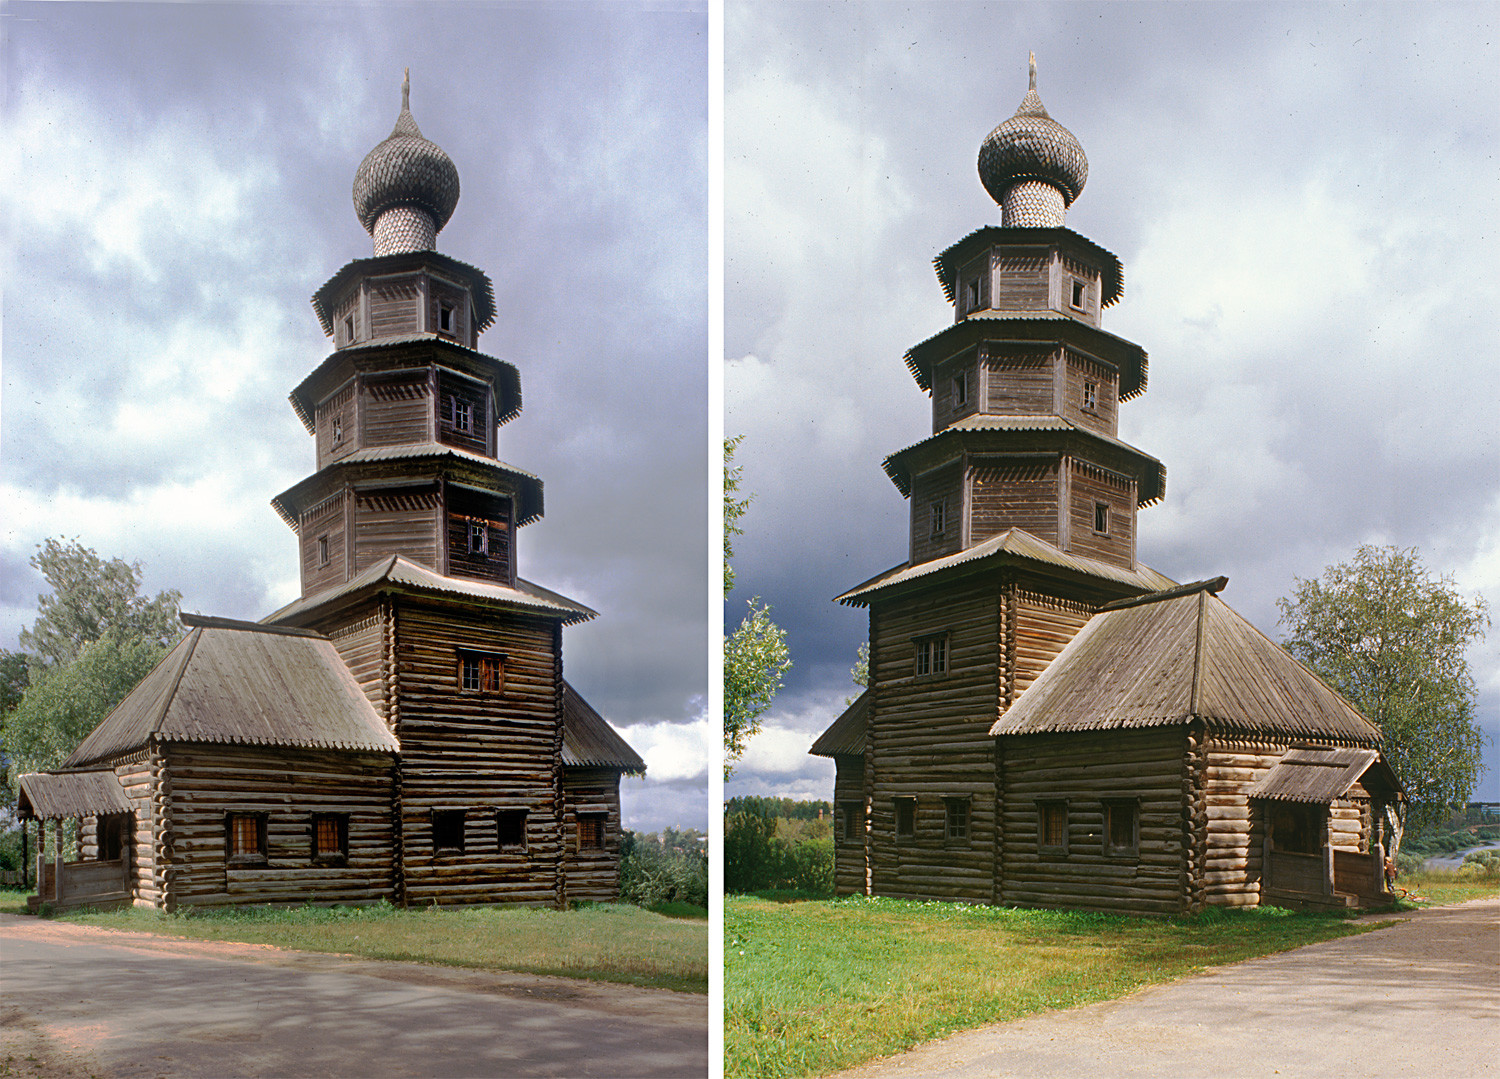 Church of the Tikhvin Icon (Old Church of the Ascension), southwest and northwest views. Aug. 13, 1995.